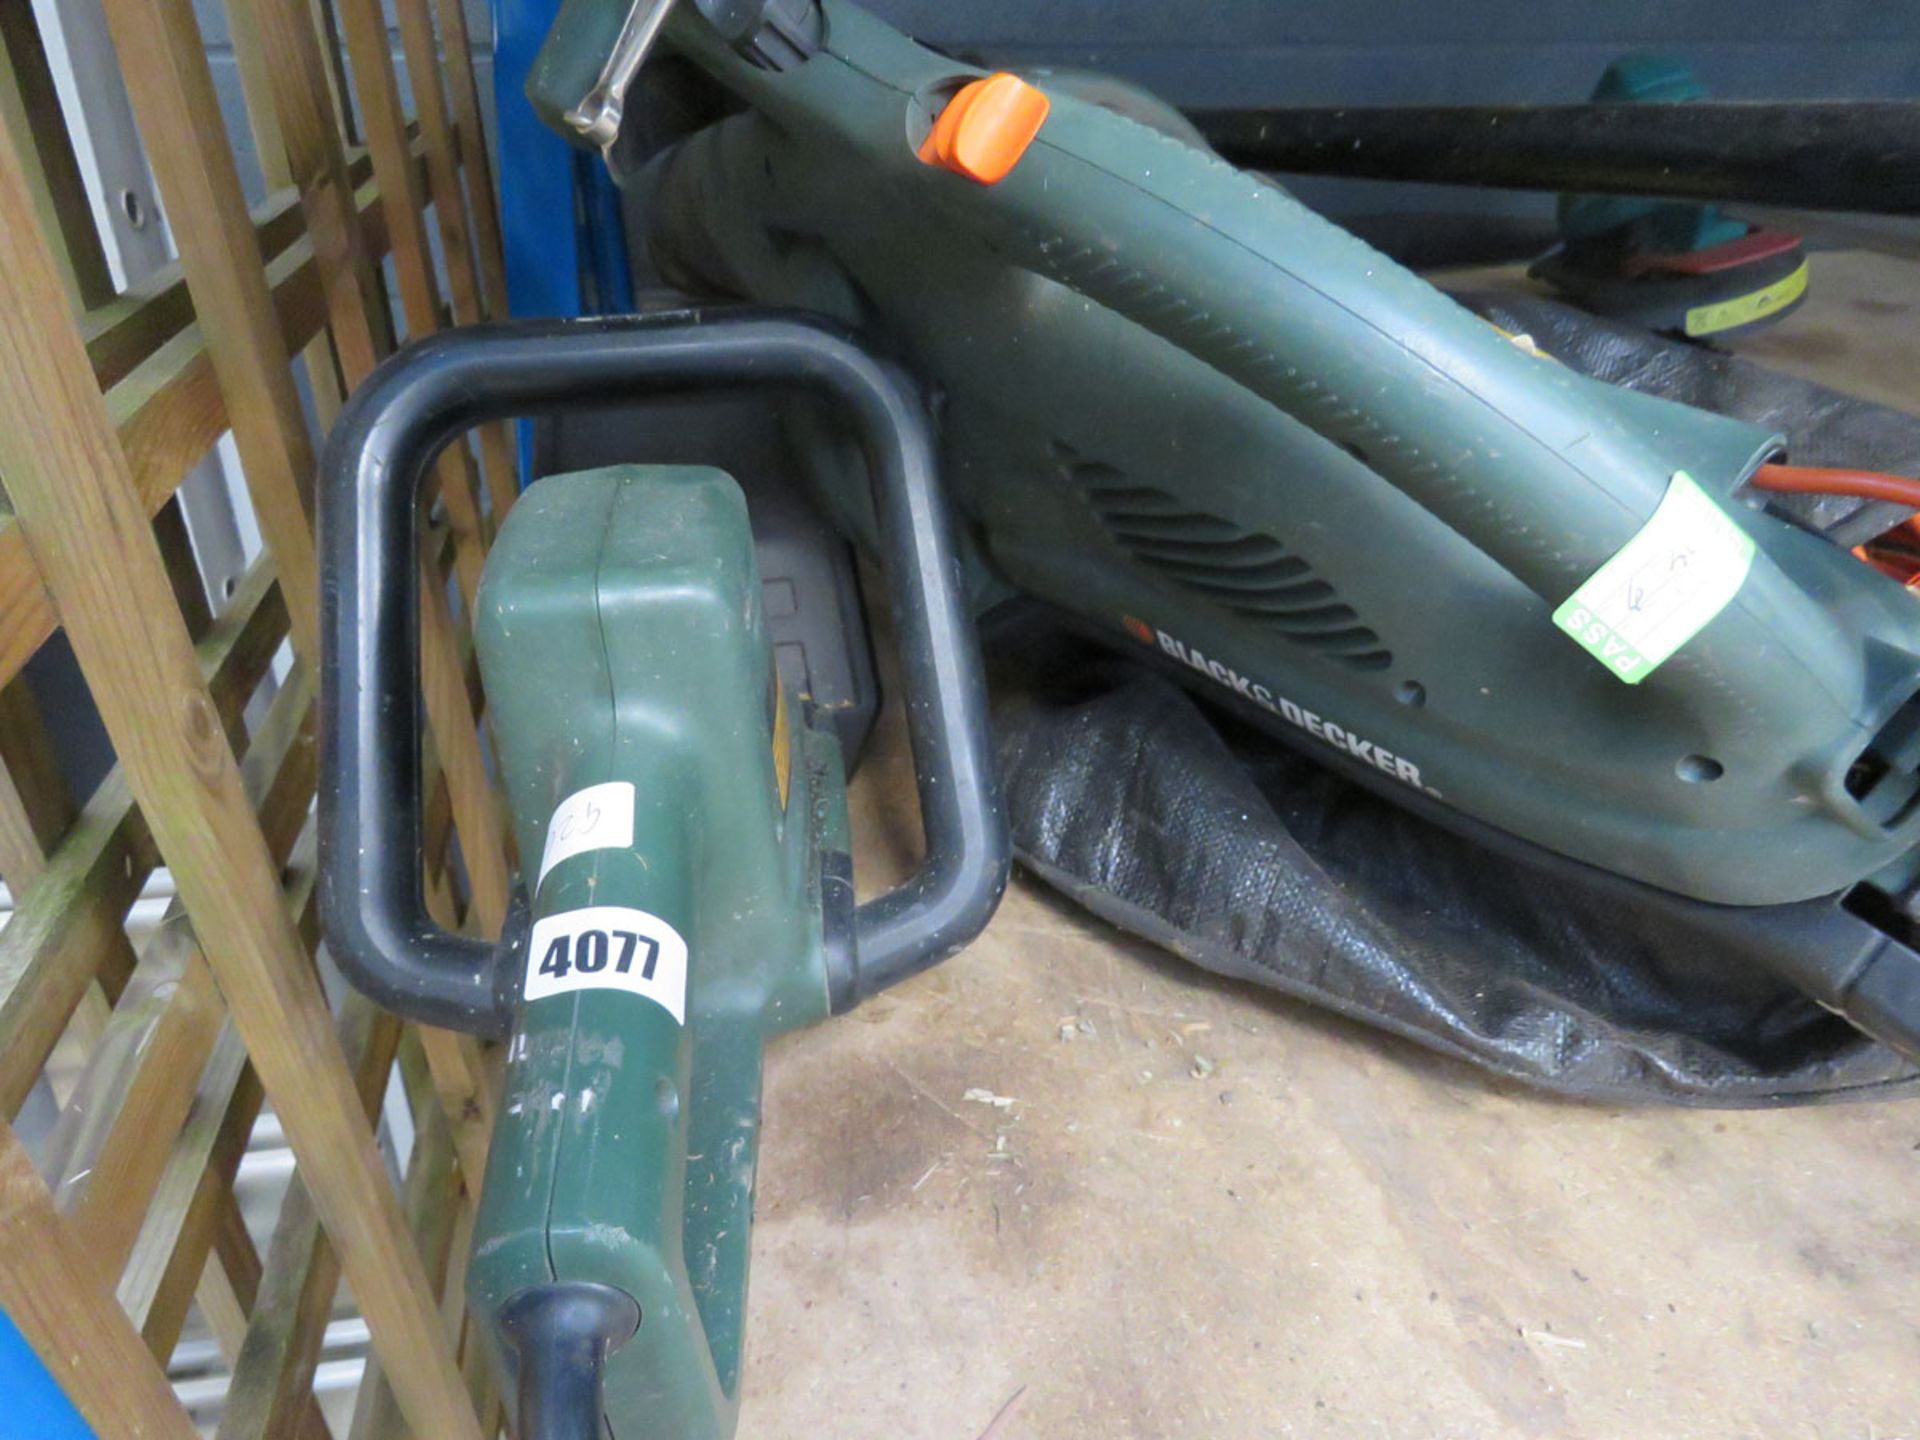 Green electric hedge cutter, strimmer and blow vac - Image 2 of 2